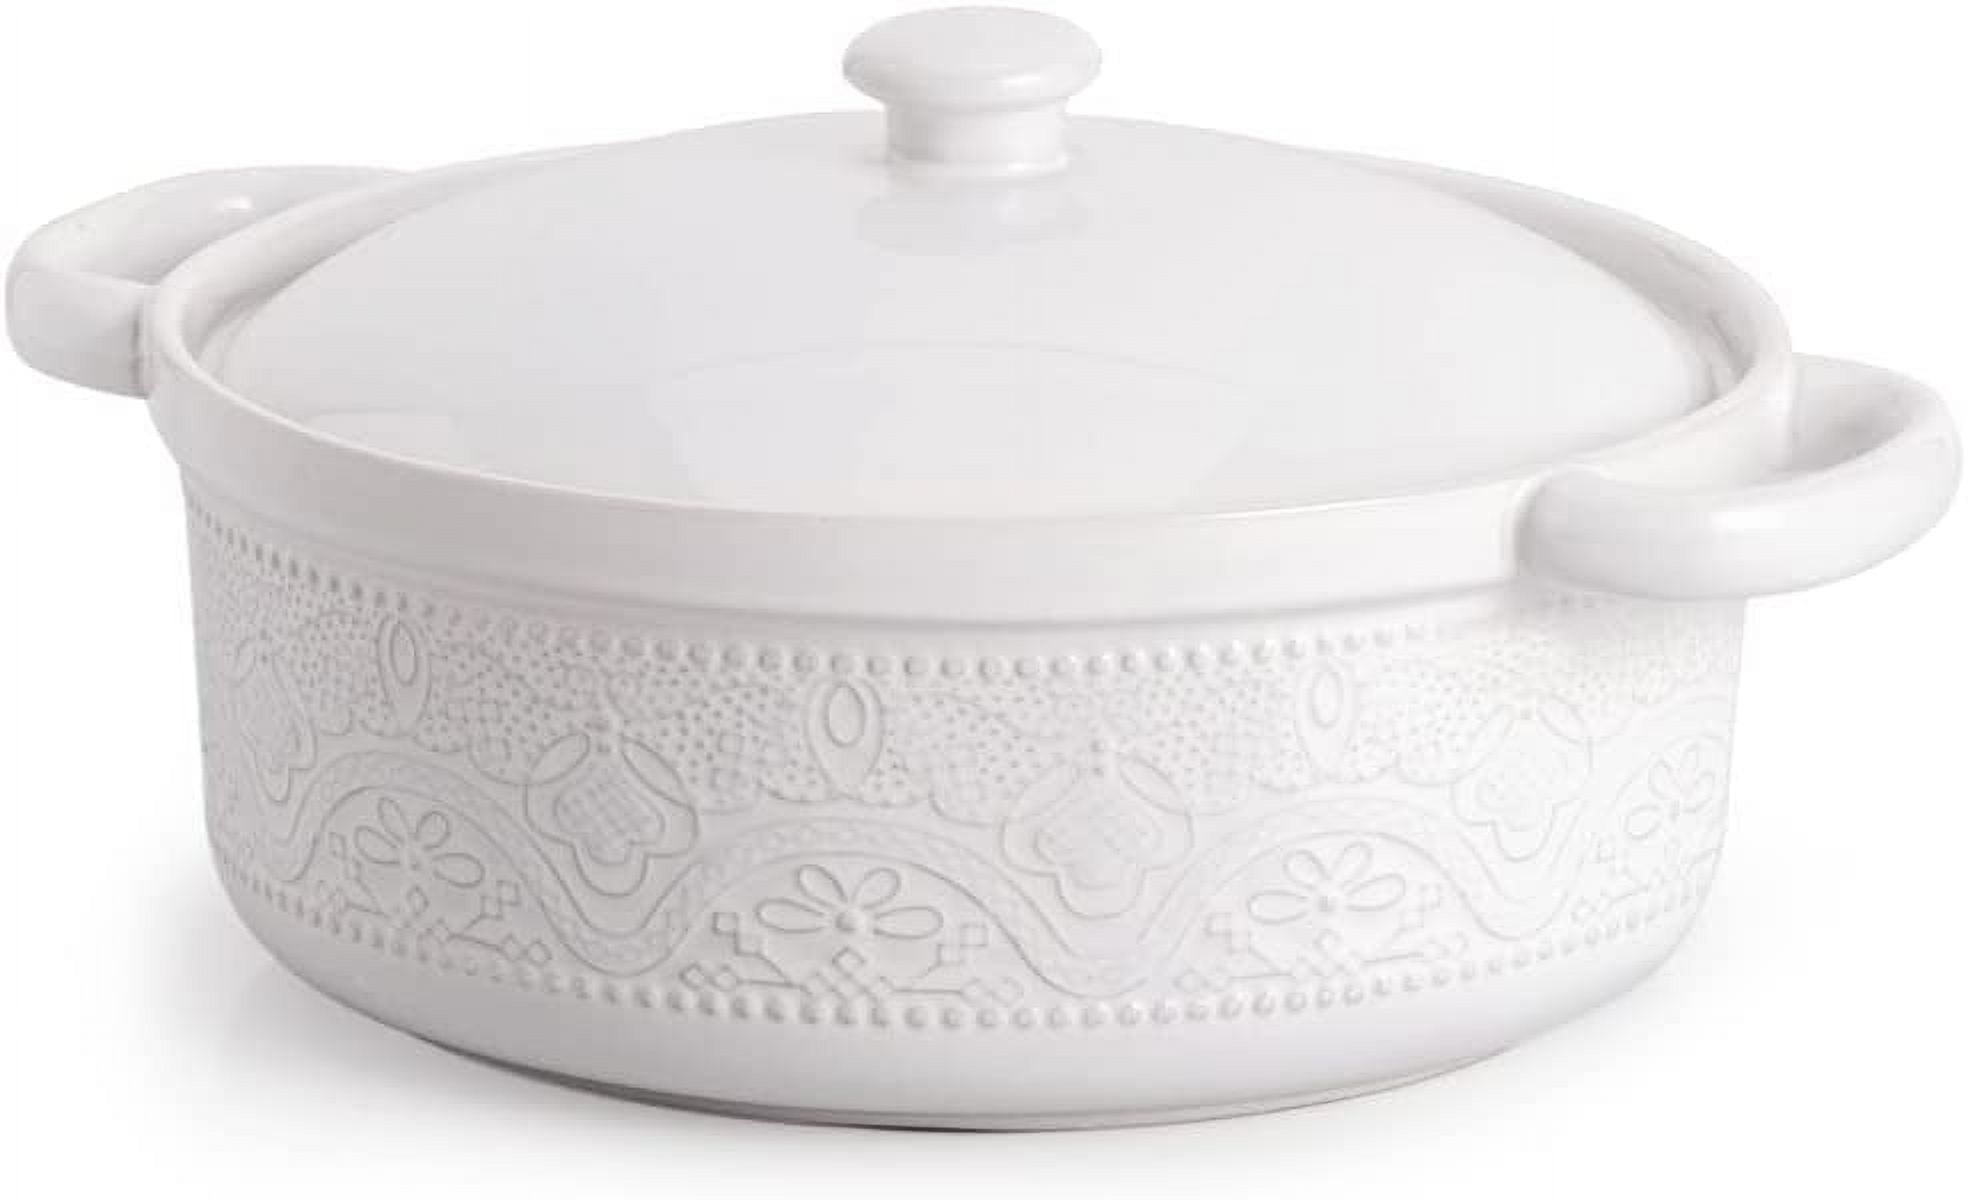 Casserole Dish, 2 Quart Round Ceramic Bakeware with Cover, Lace